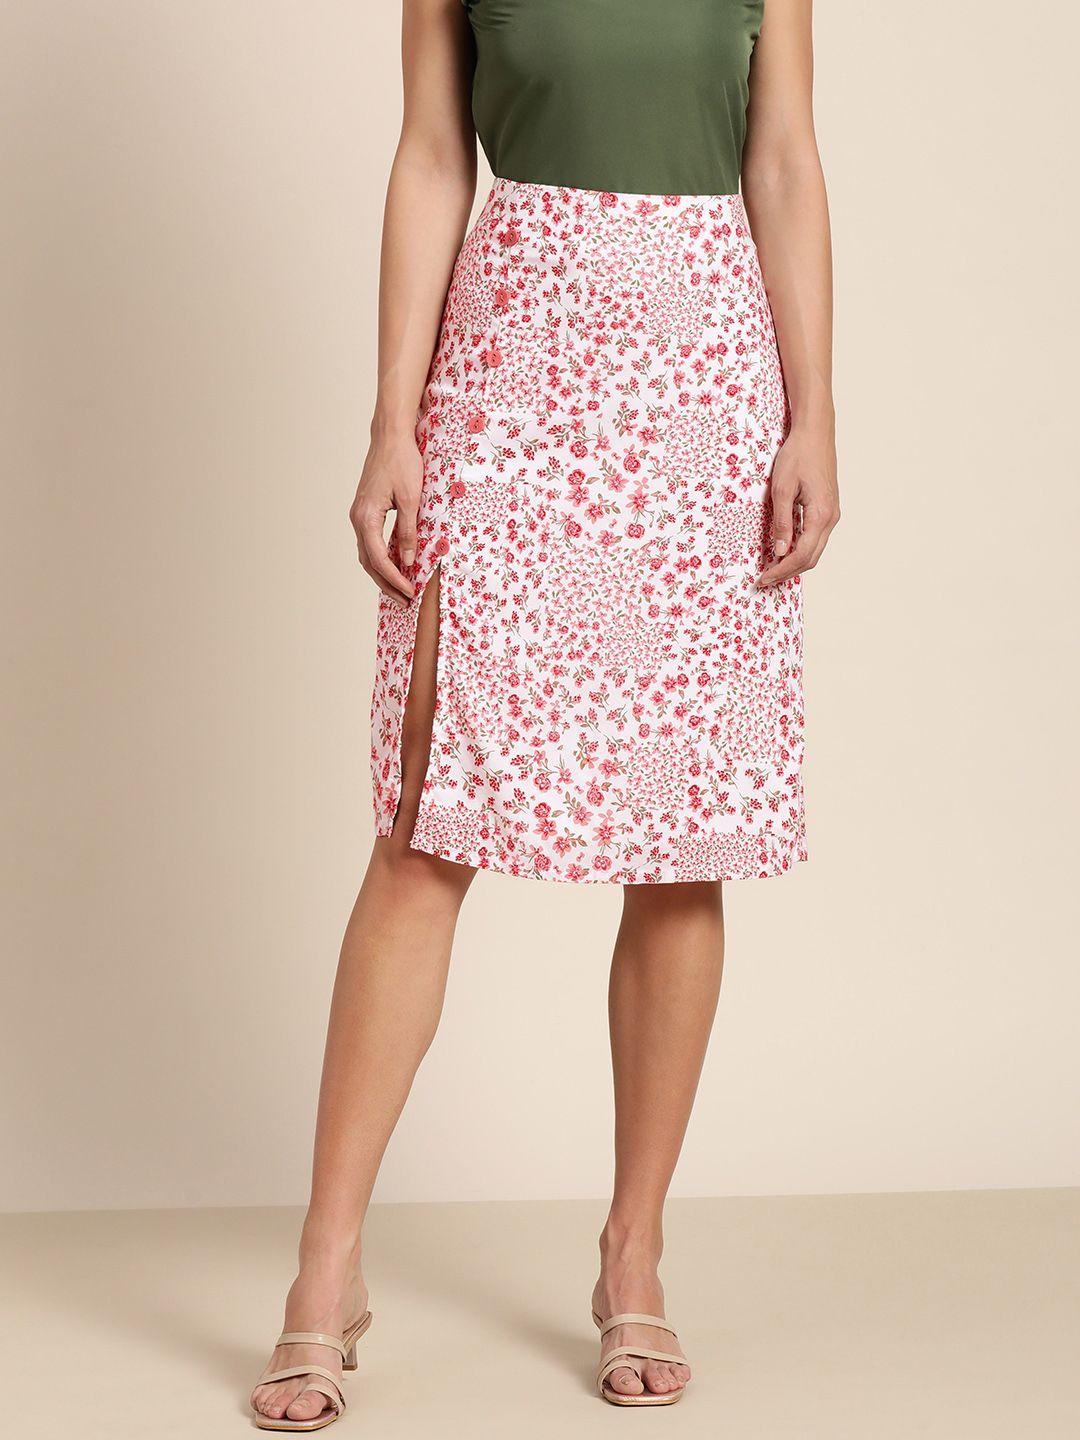 marie-claire-women-white-&-pink-disty-floral-print-high-slit-a-line-skirt